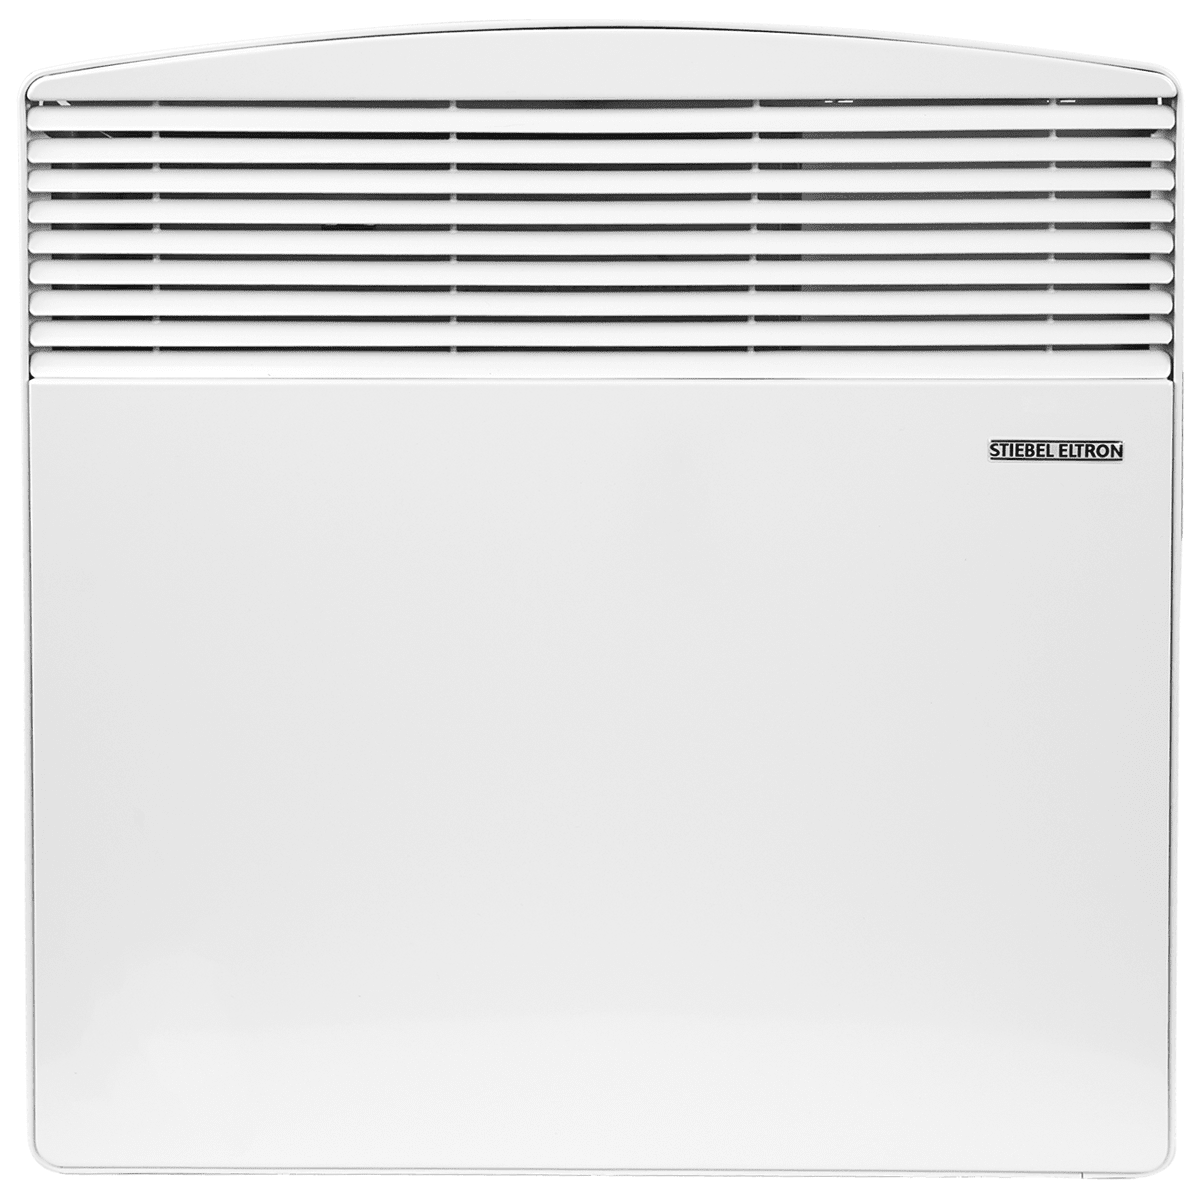 Stiebel Eltron 240V Wall Mounted Convection Heater 1000W